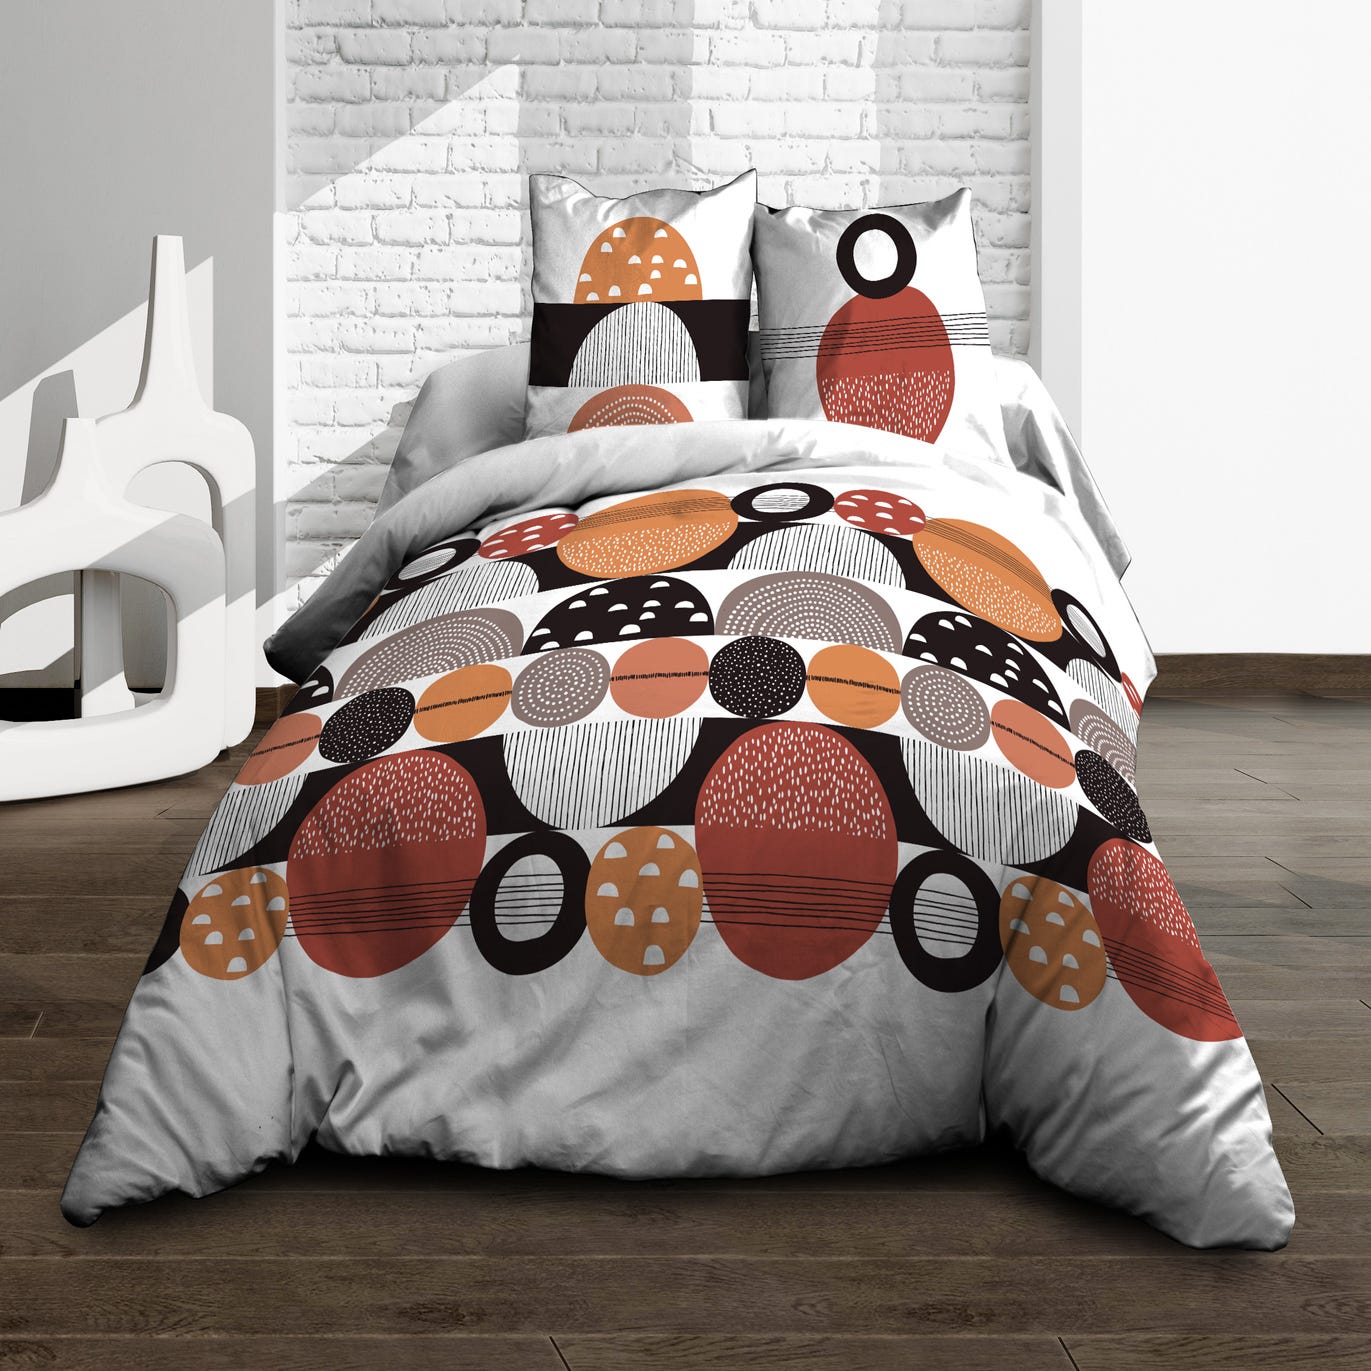 Housse de couette 220x240 + 2 taies - Pur coton 57 fils - IN201 Terracotta  - Cosy Collection